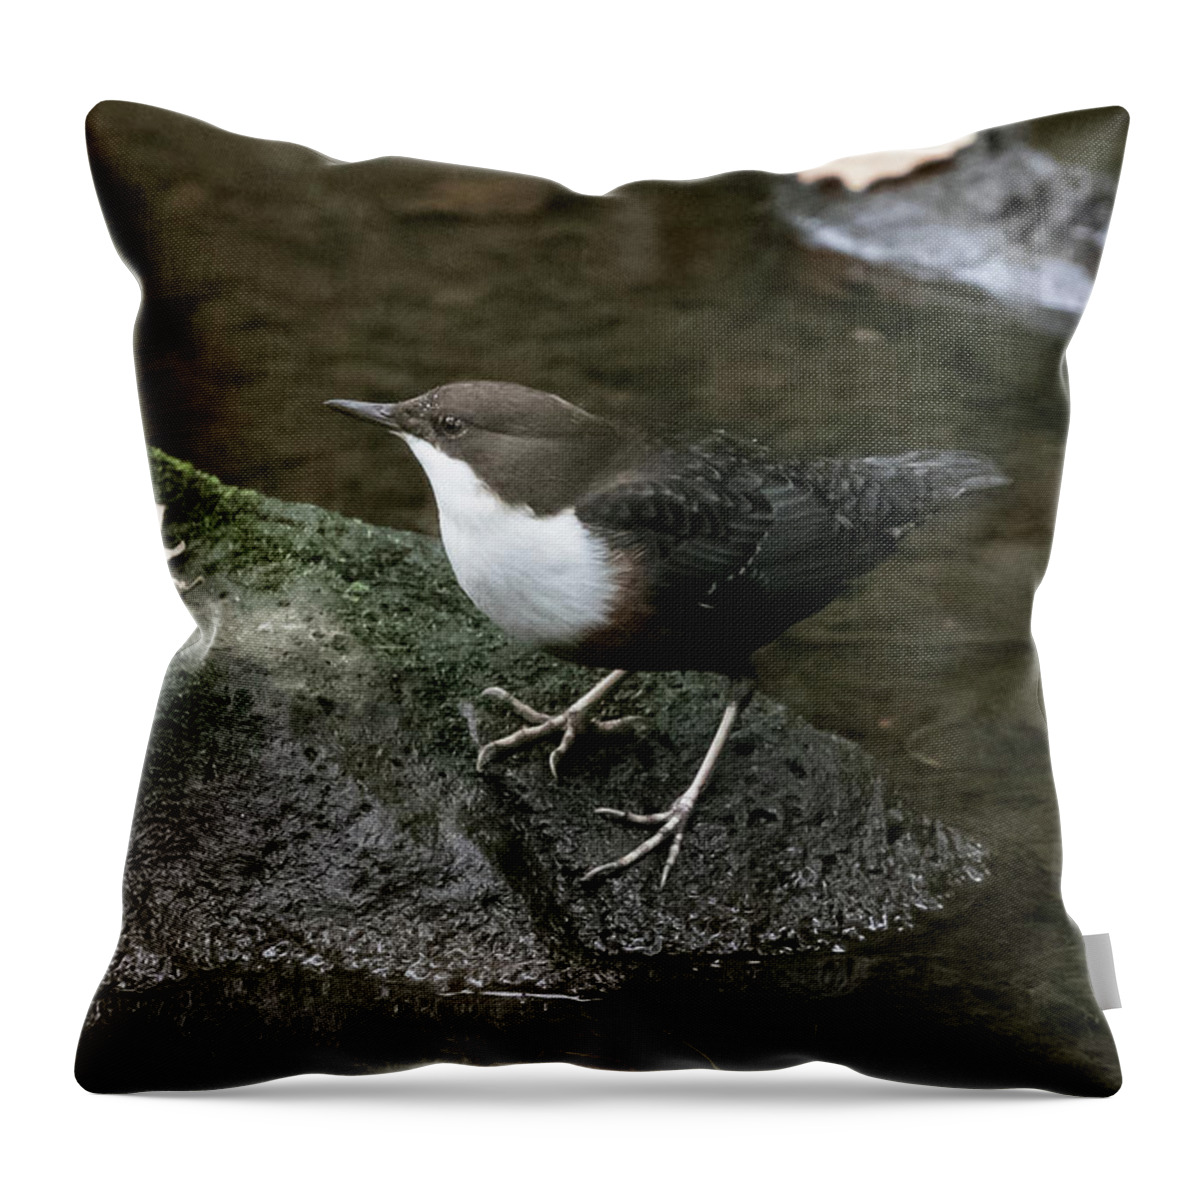 Flyladyphotographybywendycooper Throw Pillow featuring the photograph Dipper #1 by Wendy Cooper